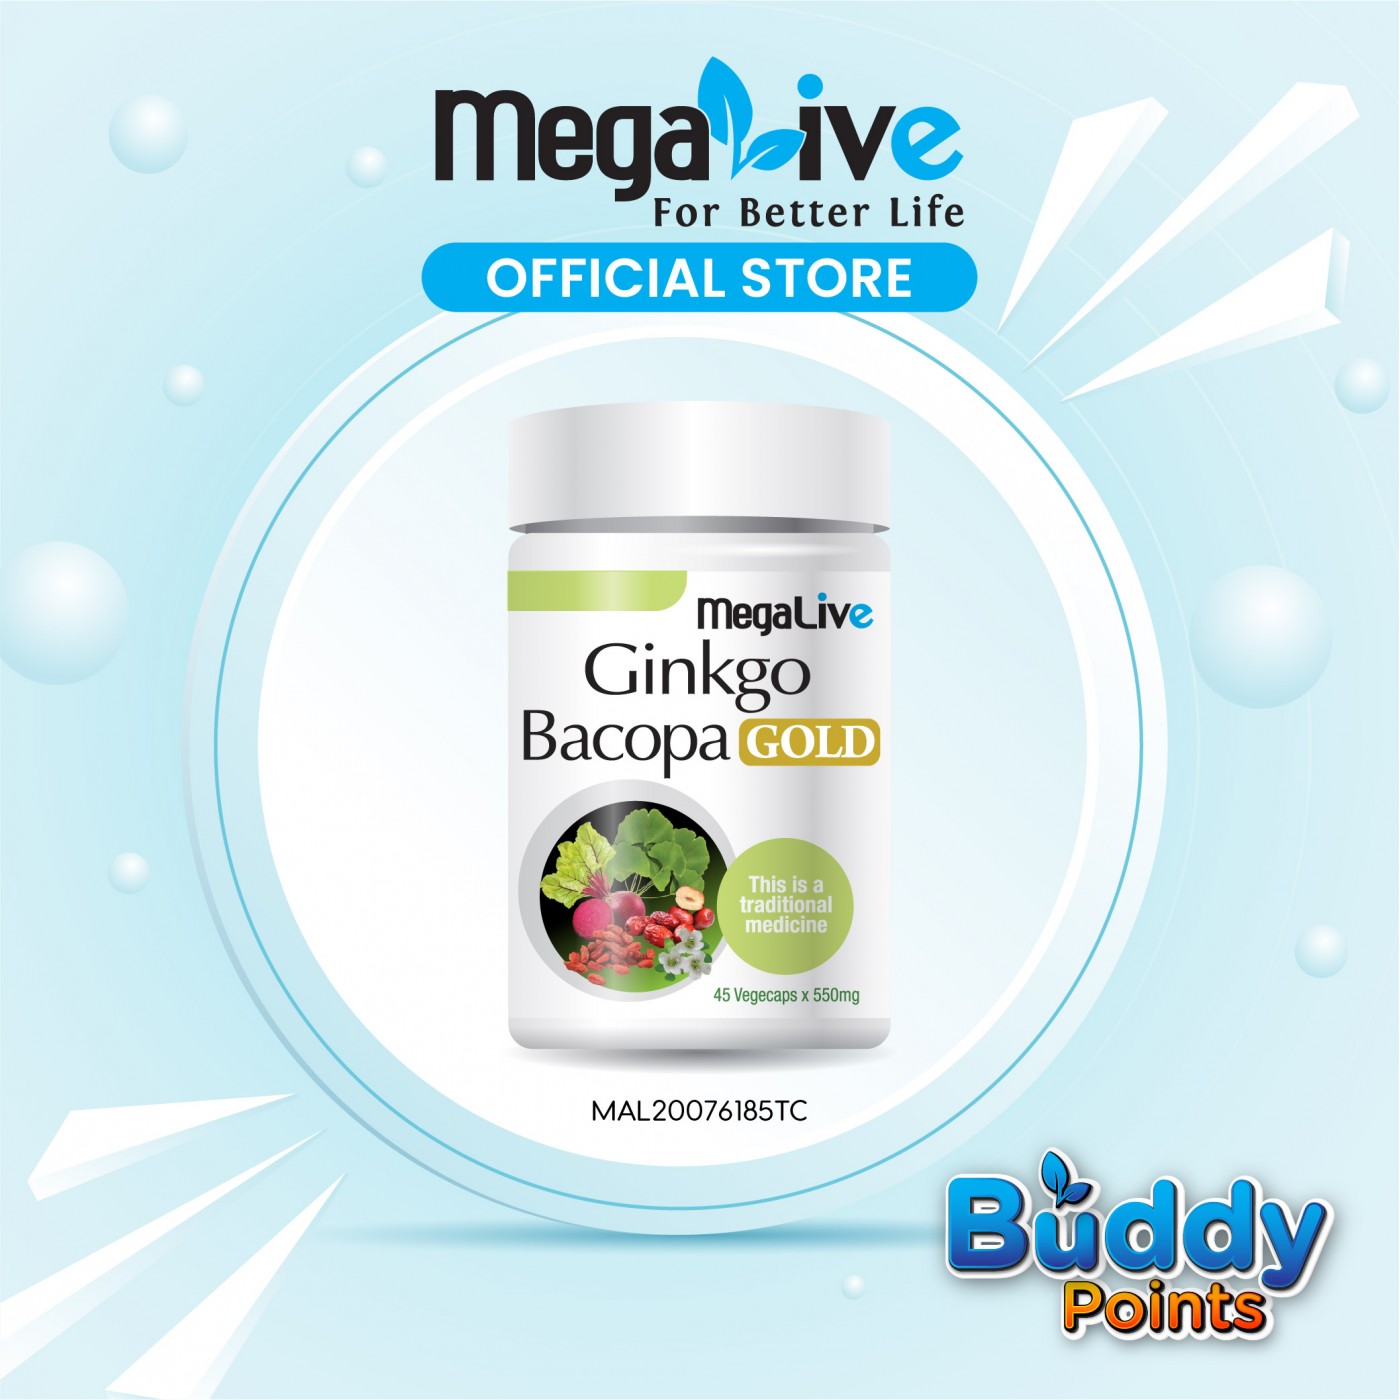 MegaLive Ginkgo Bacopa Gold